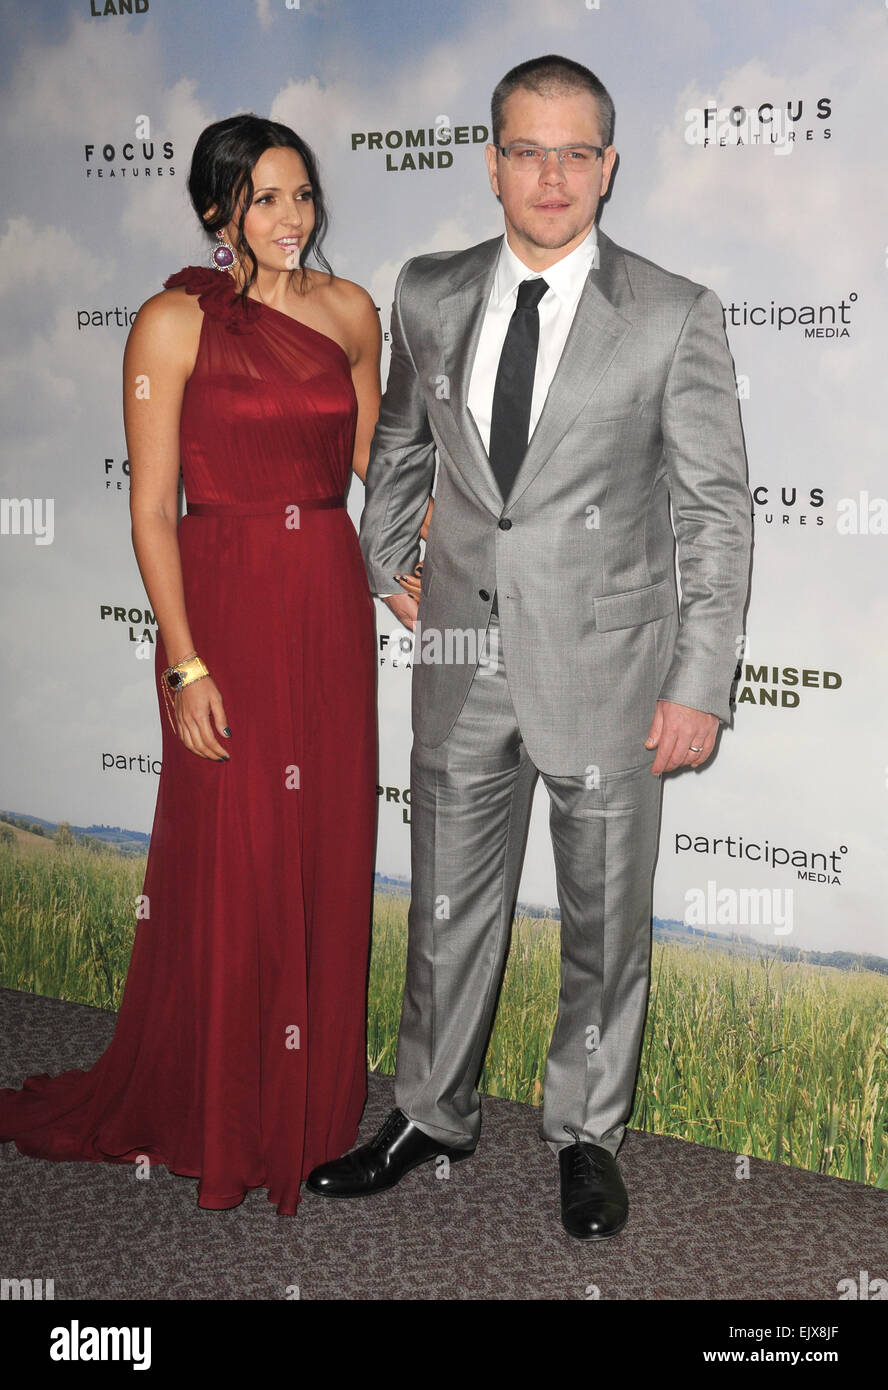 LOS ANGELES, CA - DECEMBER 6, 2012: Matt Damon & wife Luciana Barroso at the Los Angeles premiere of his new movie 'Promised Land' at the Directors Guild Theatre. Stock Photo